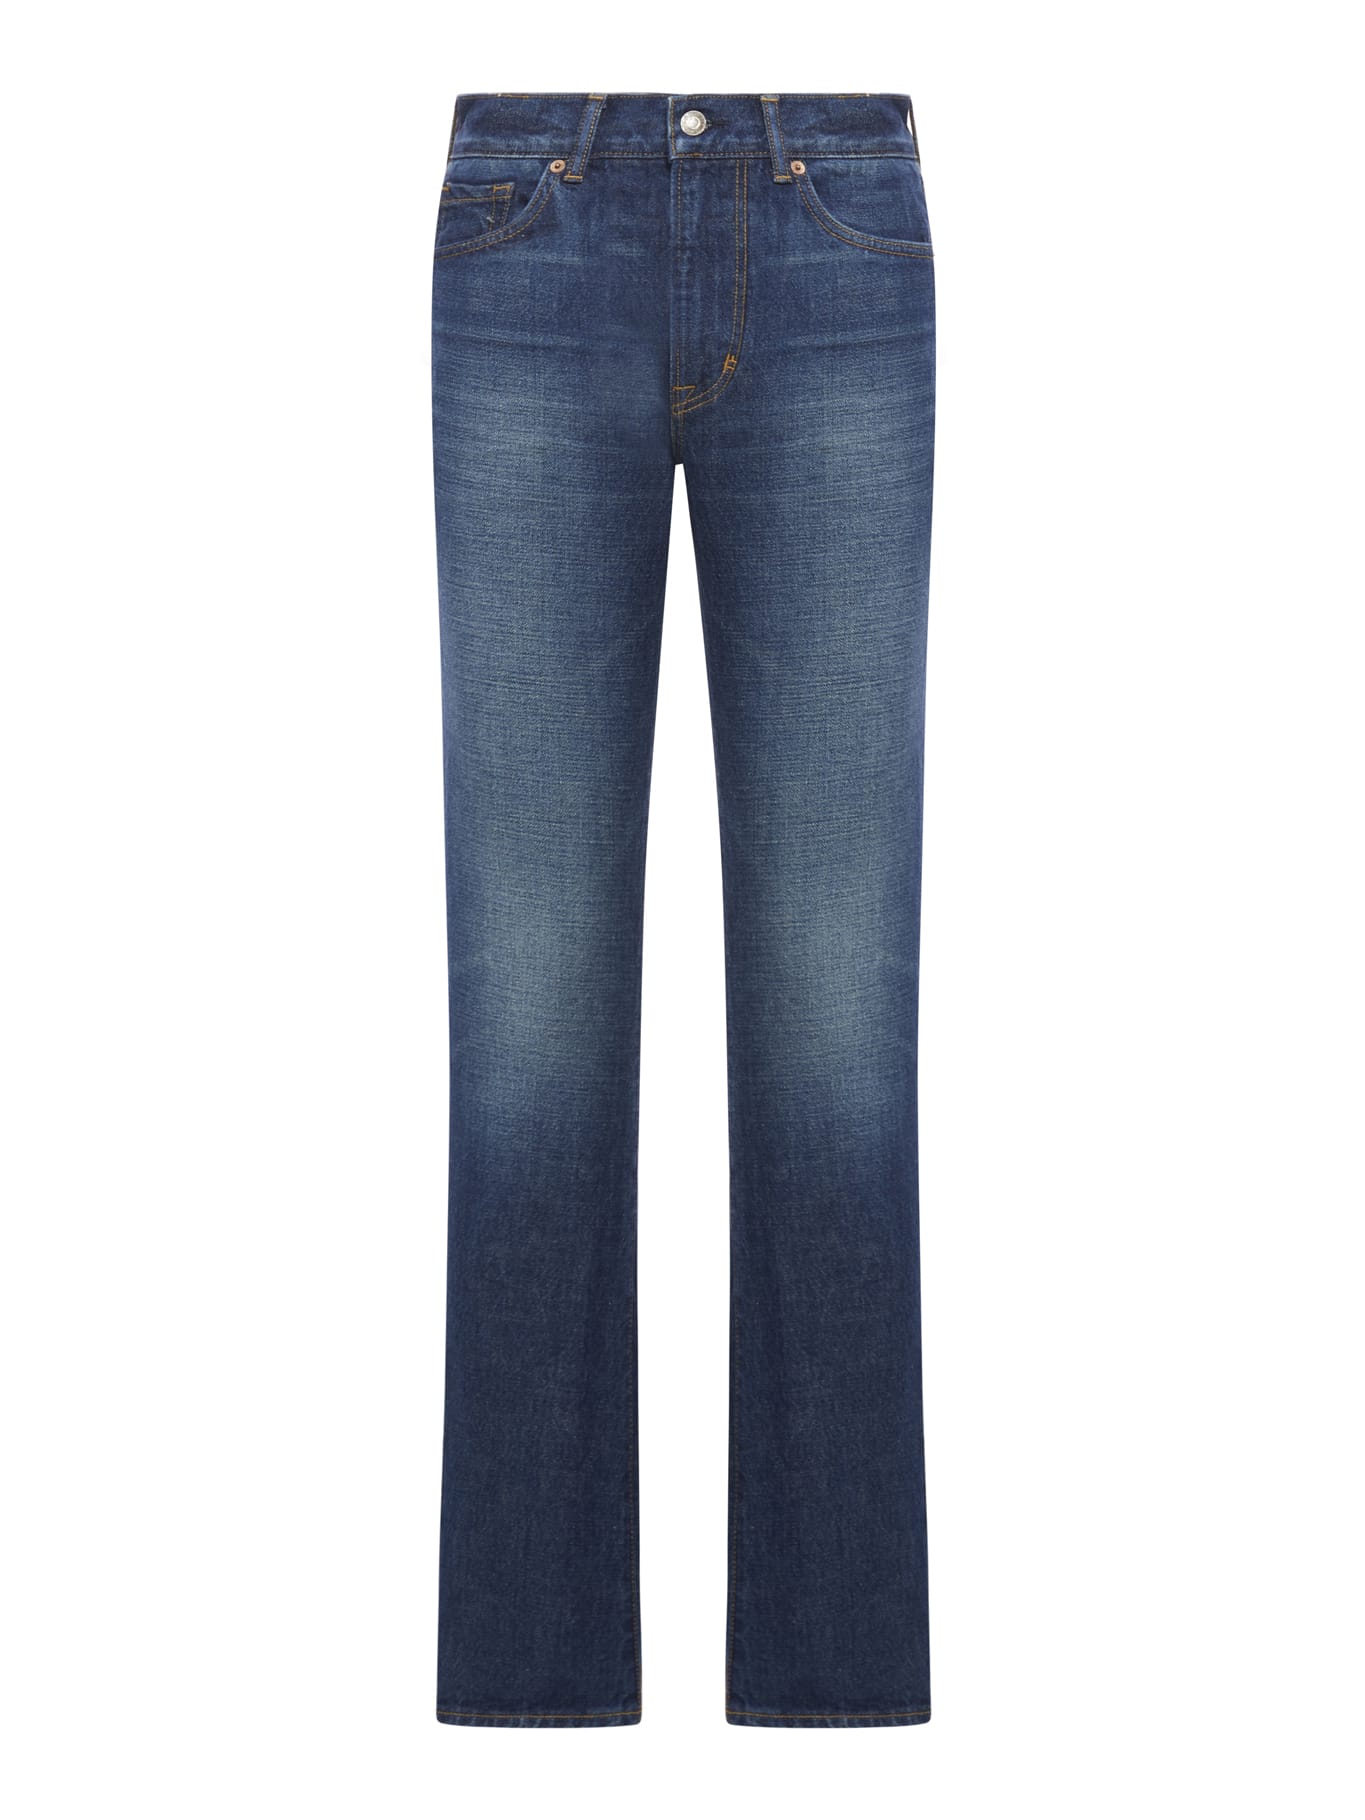 TOM FORD STONE WASHED DENIM STRAIGHT PANTS